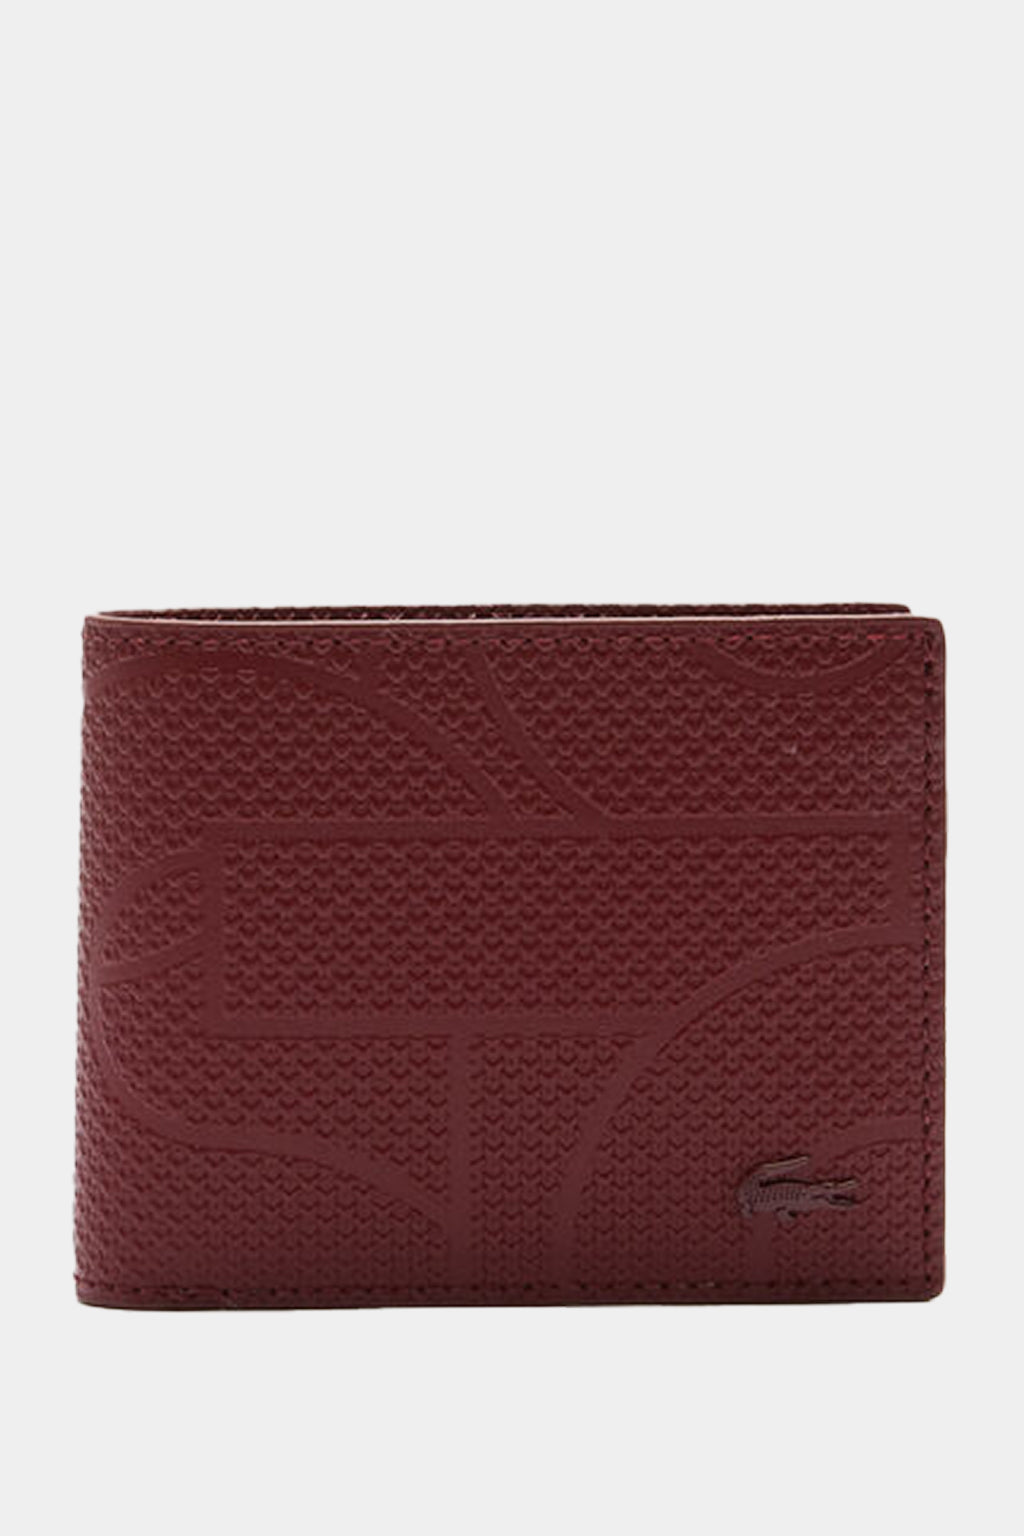 Lacoste - Chantaco Small Graphic Piqué Leather Wallet